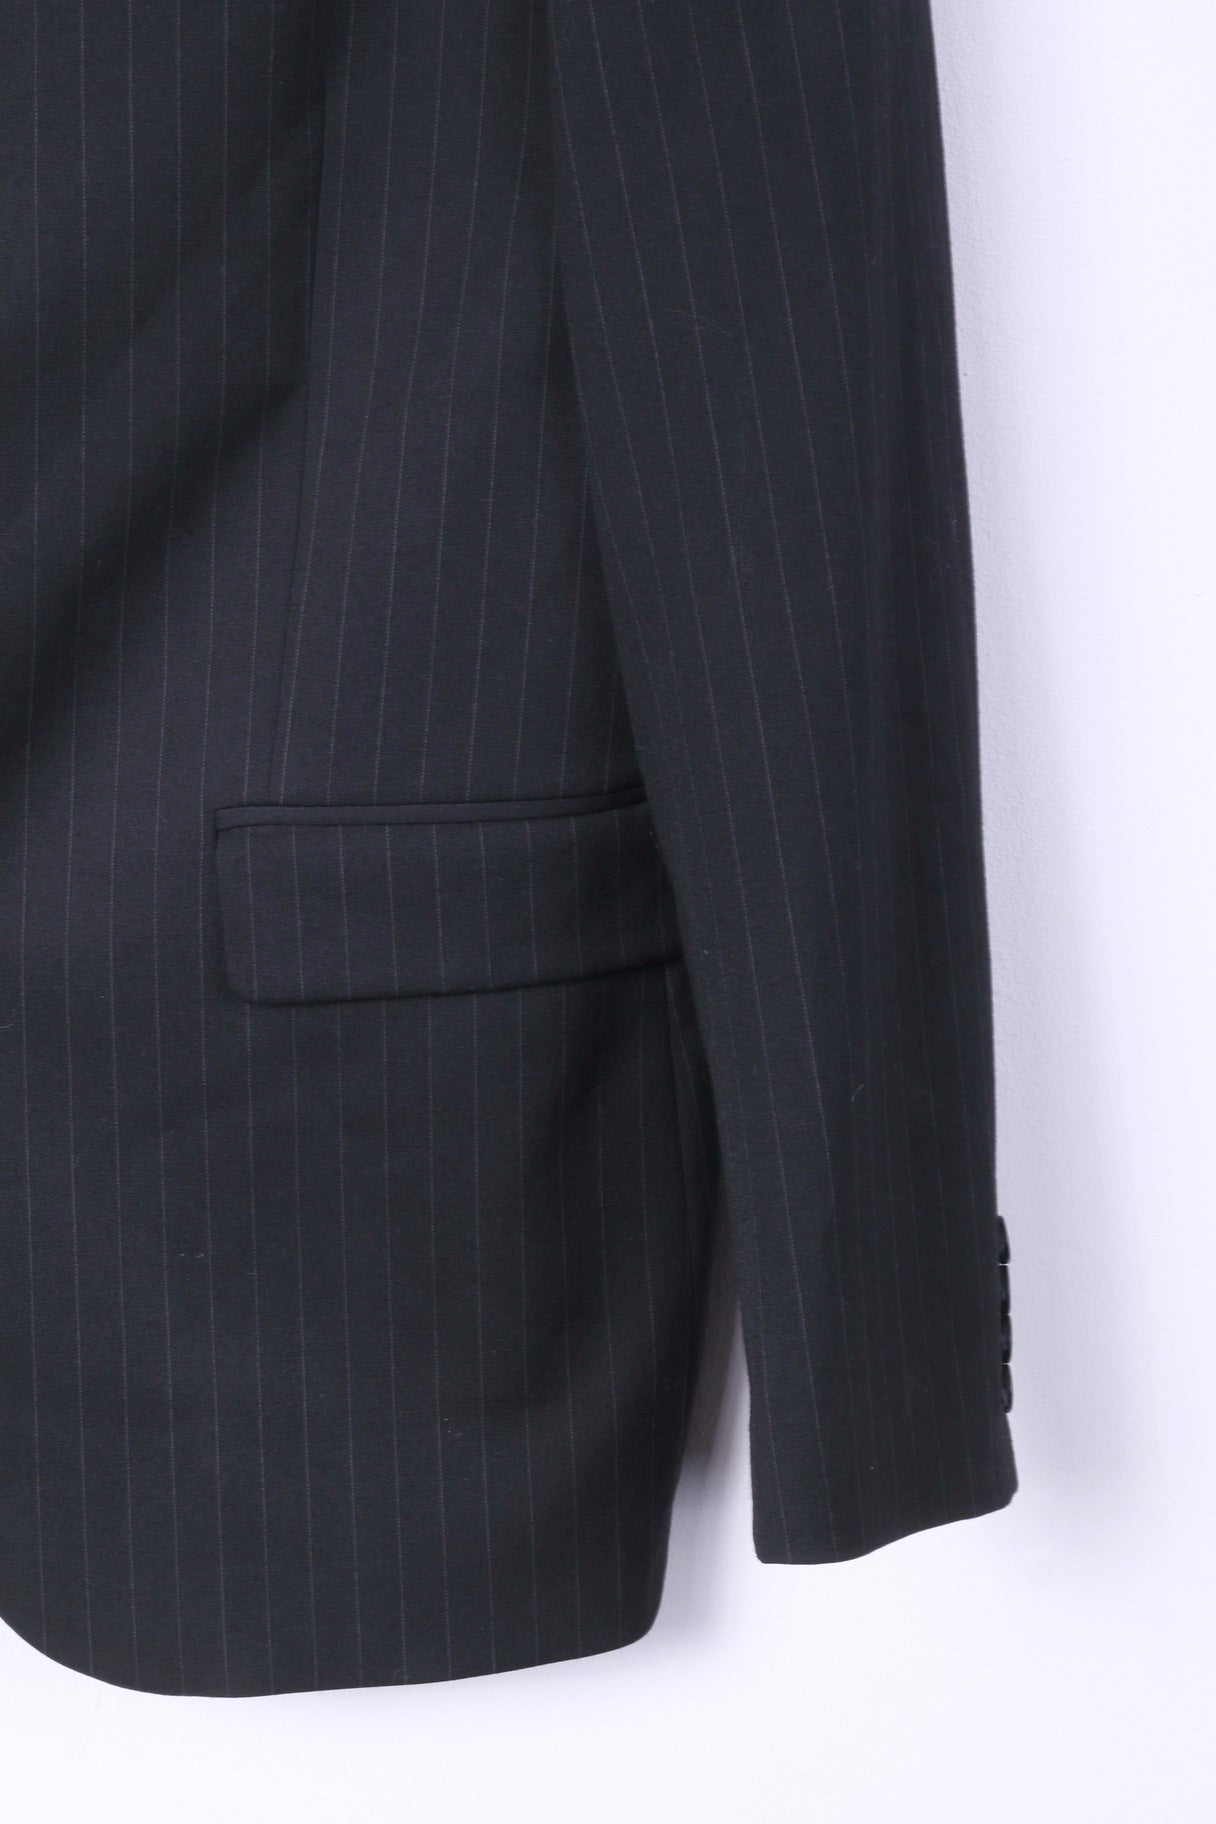 United Colors Of Benetton Men 50 40 Suit Blazer Trousers Black Striped Single Breasted Stretch